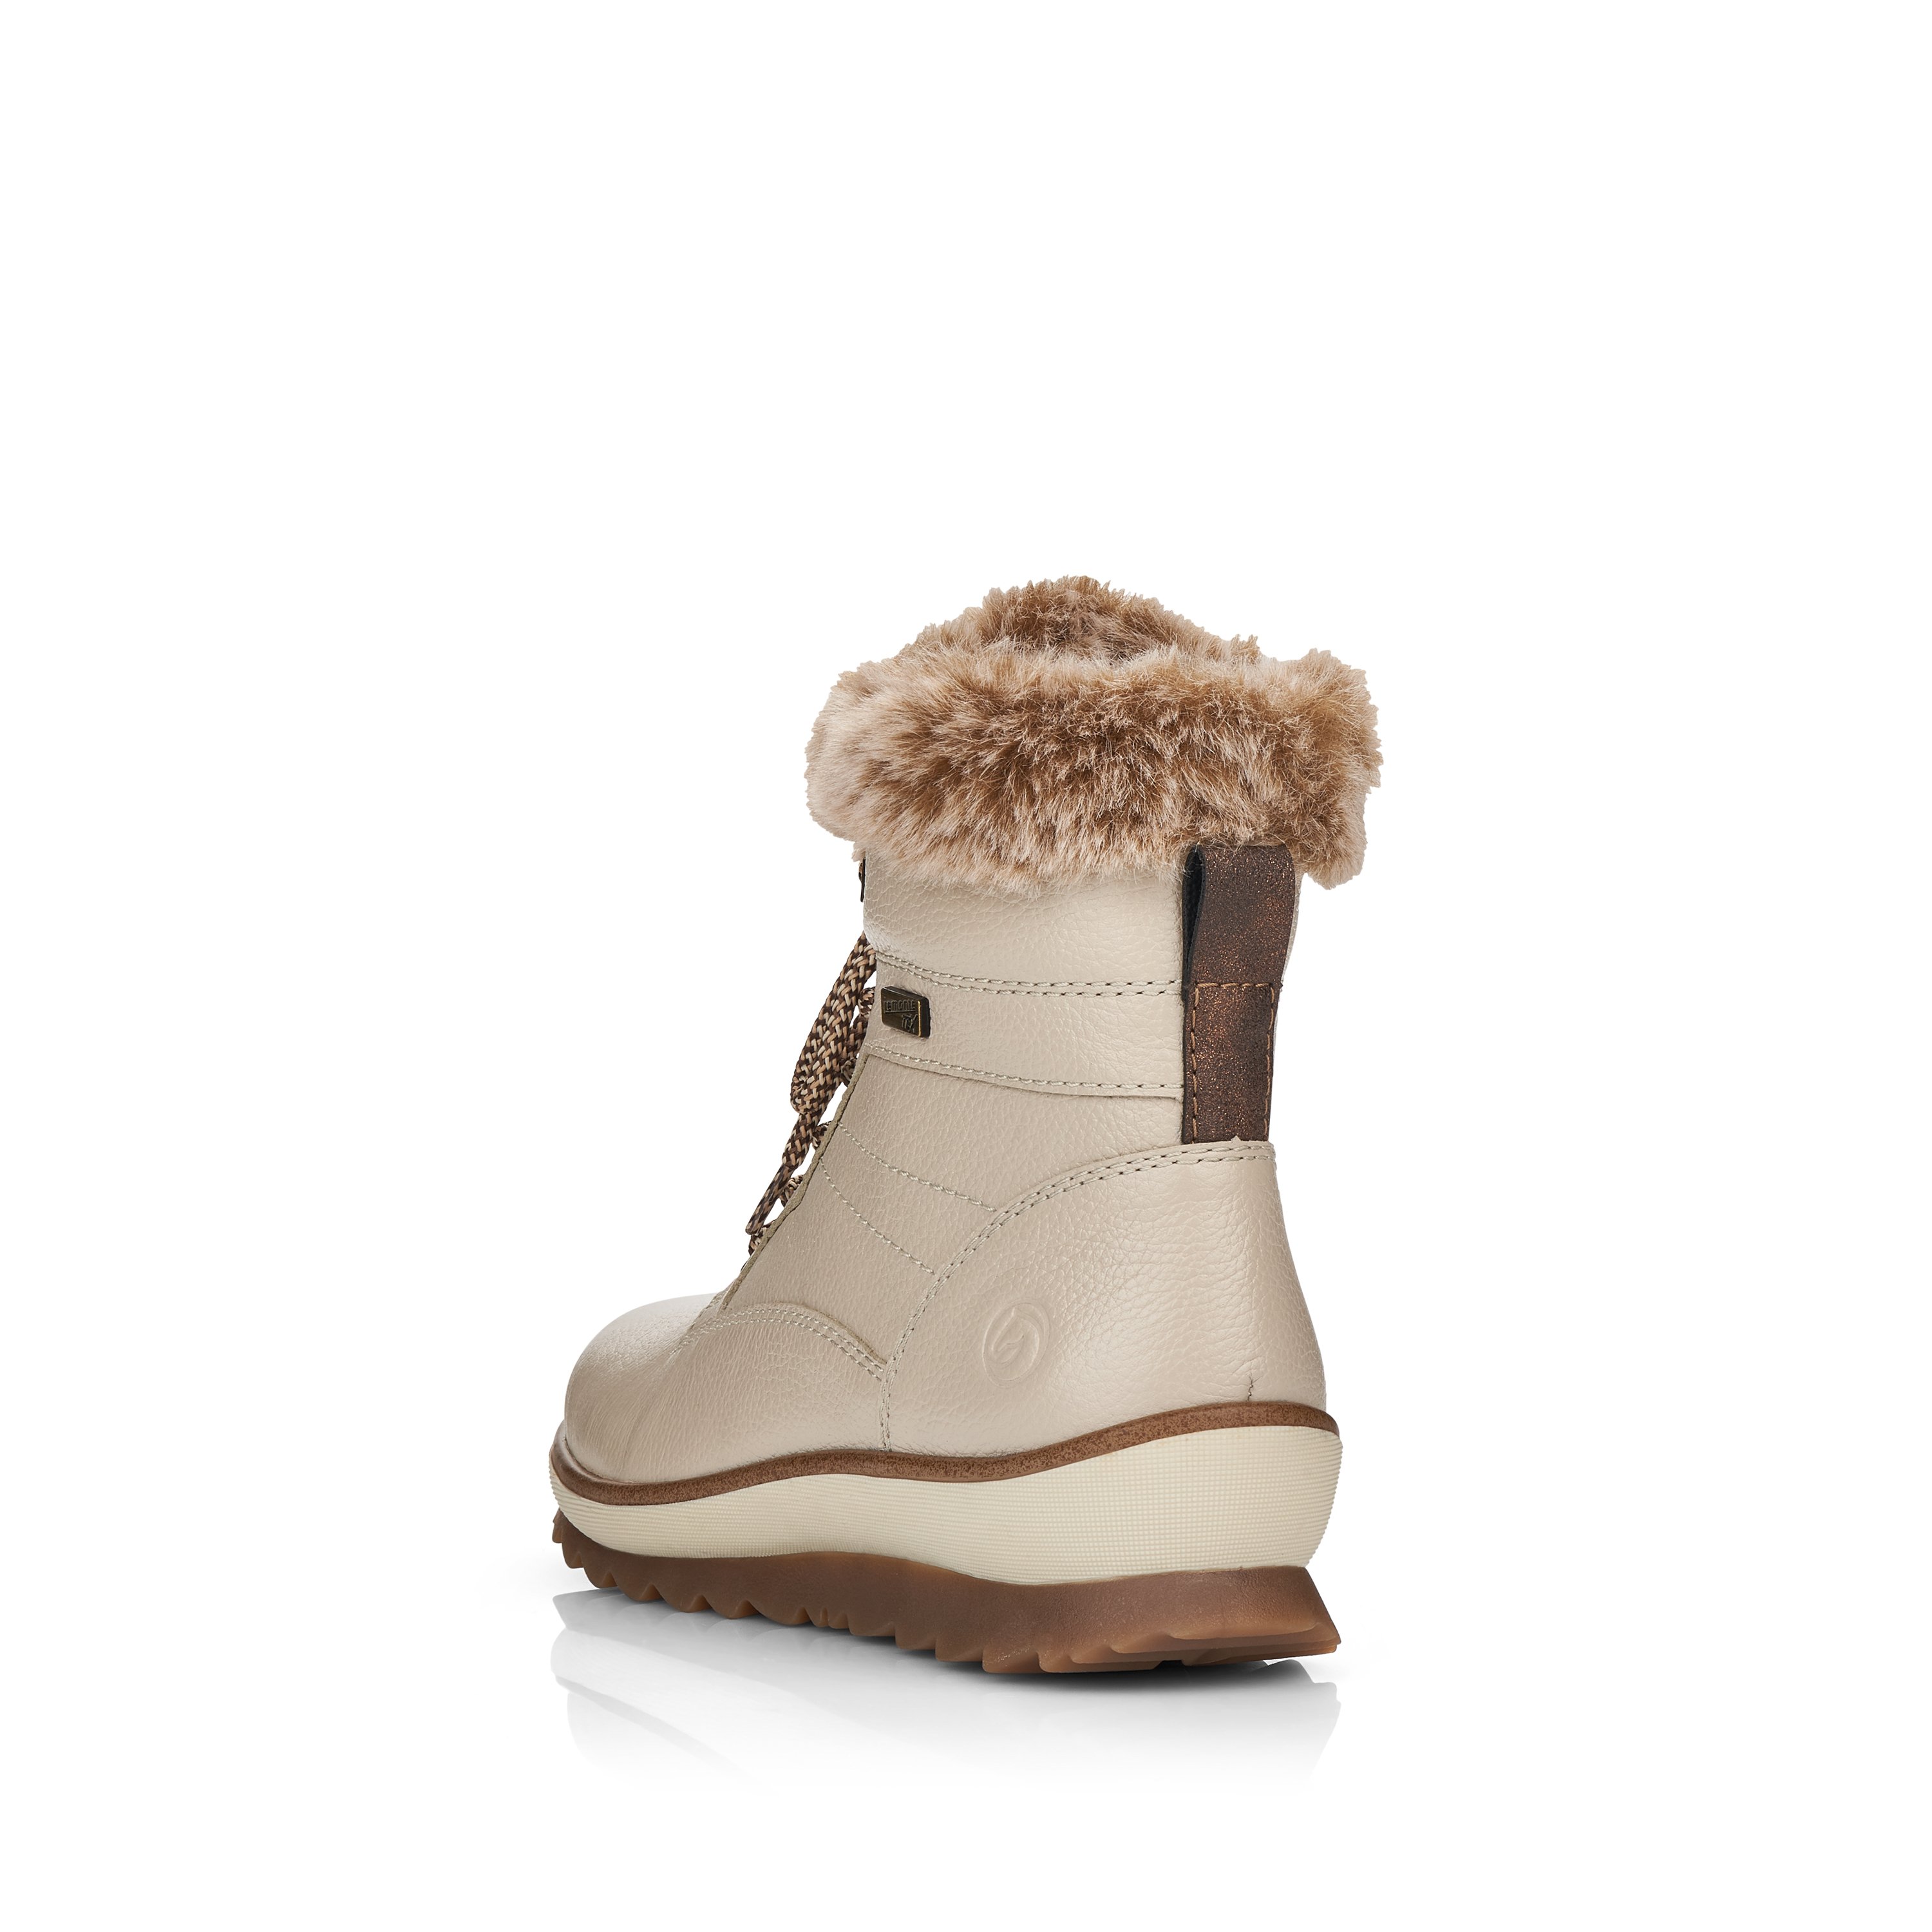 Brown beige remonte women´s lace-up boots R8477-60 with cushioning profile sole. Shoe from the back